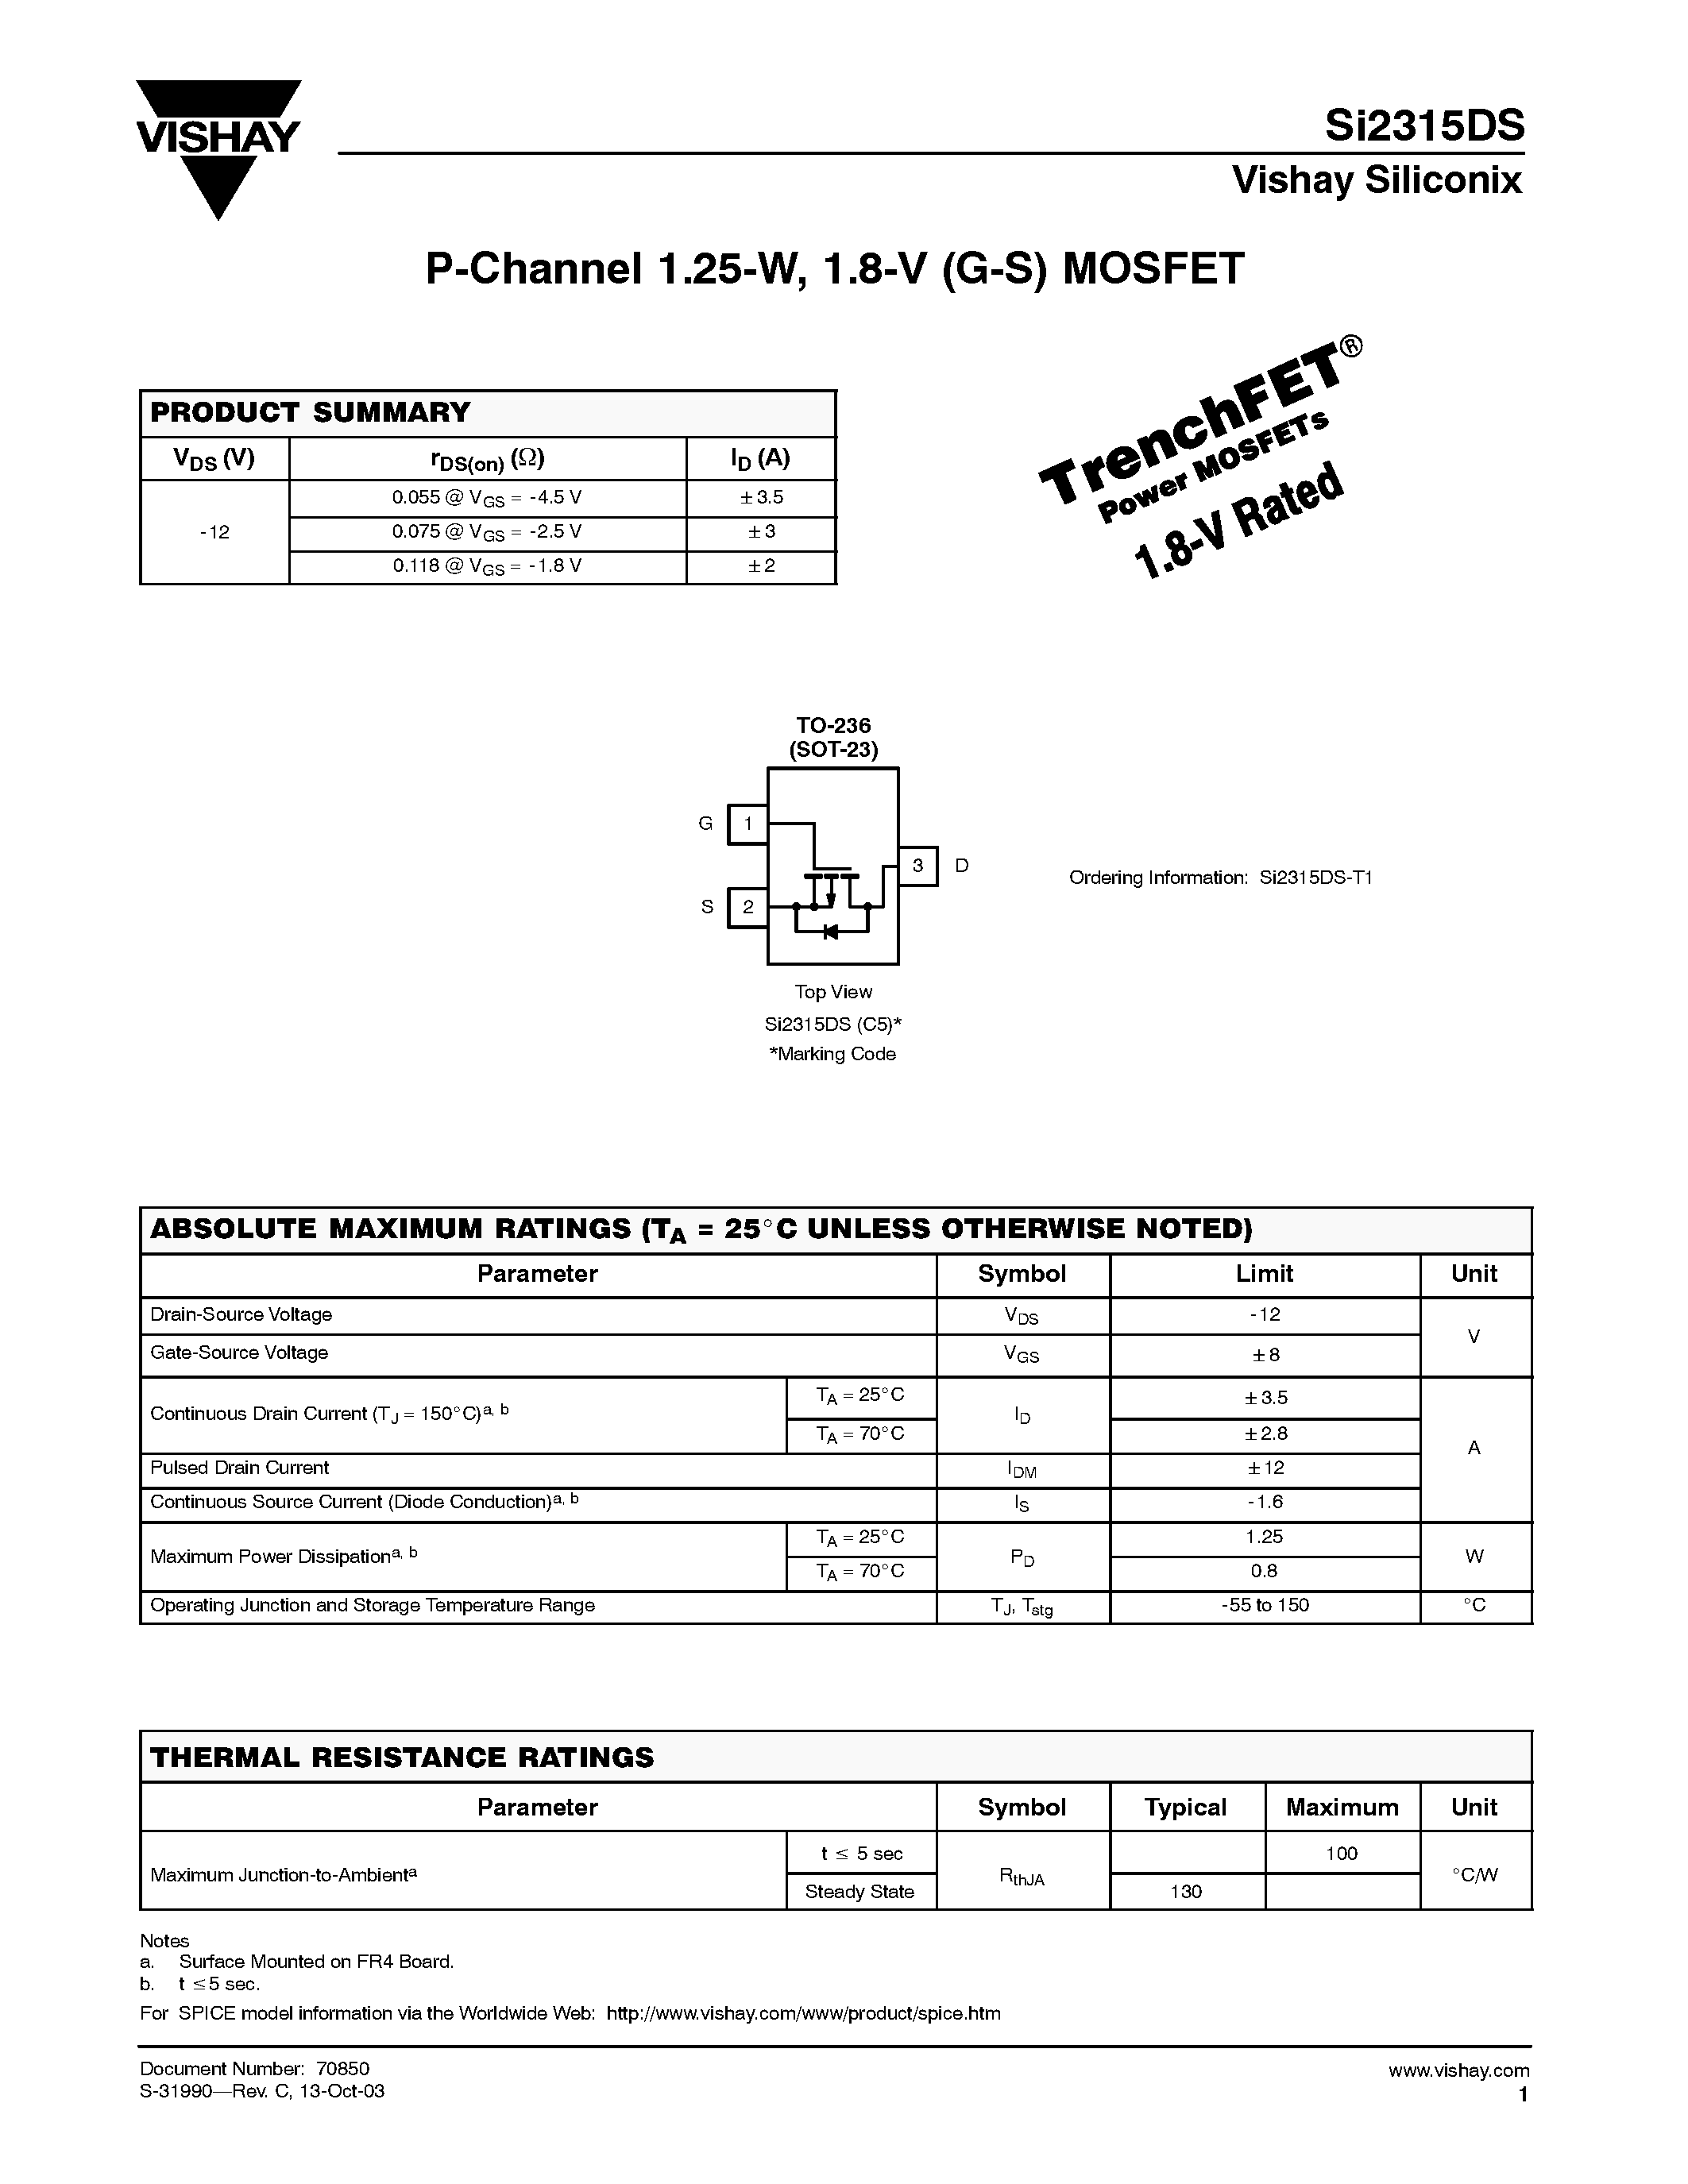 Datasheet SI2315DS - P-Channel 1.25-W/ 1.8-V (G-S) MOSFET page 1